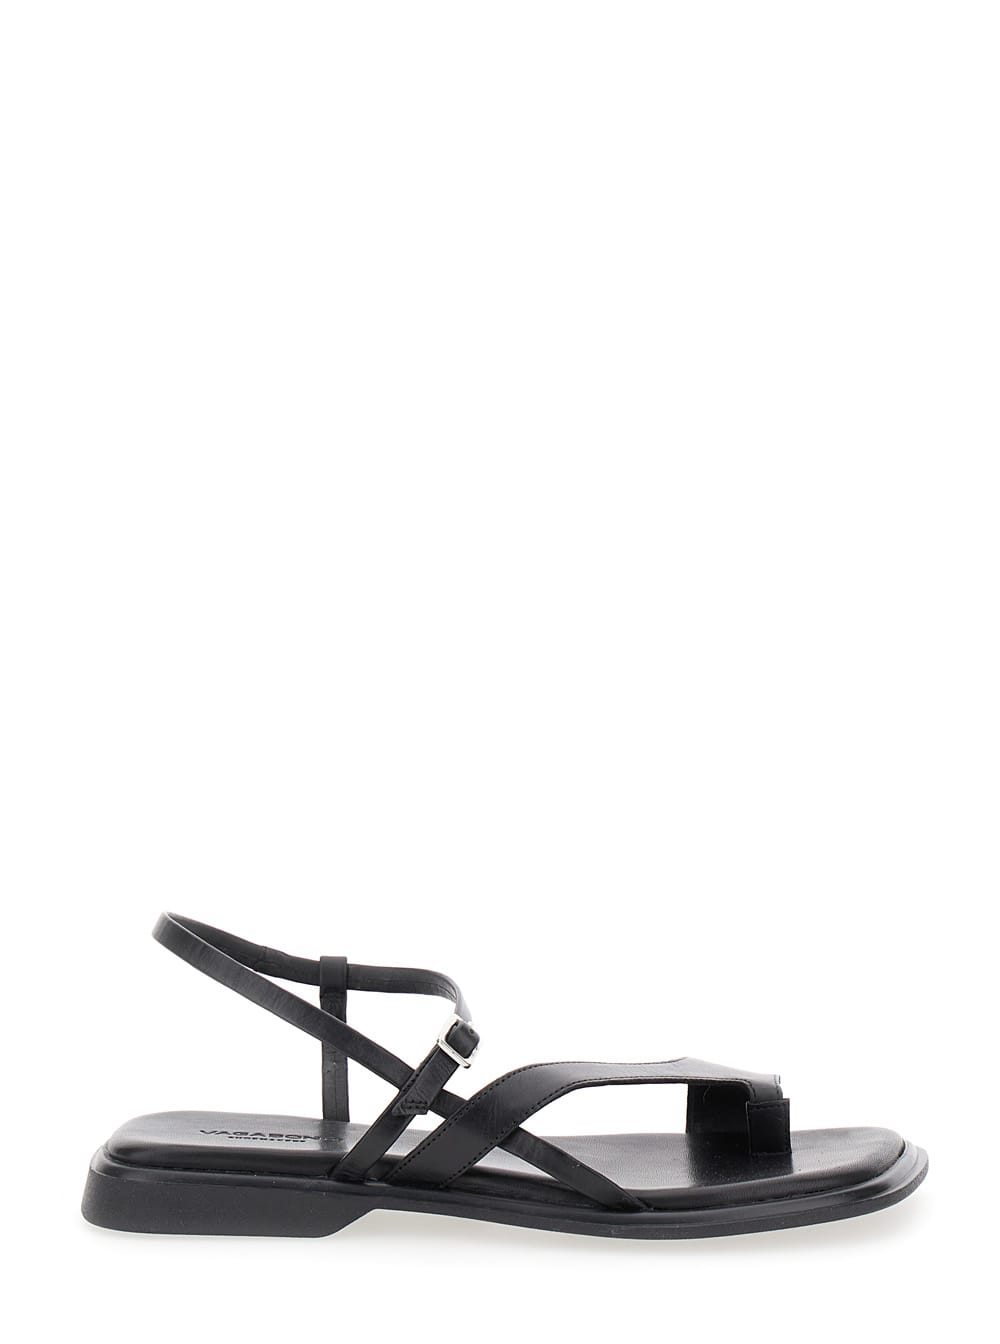 izzi Black Thong Sandals With Thin Straps In Leather Woman